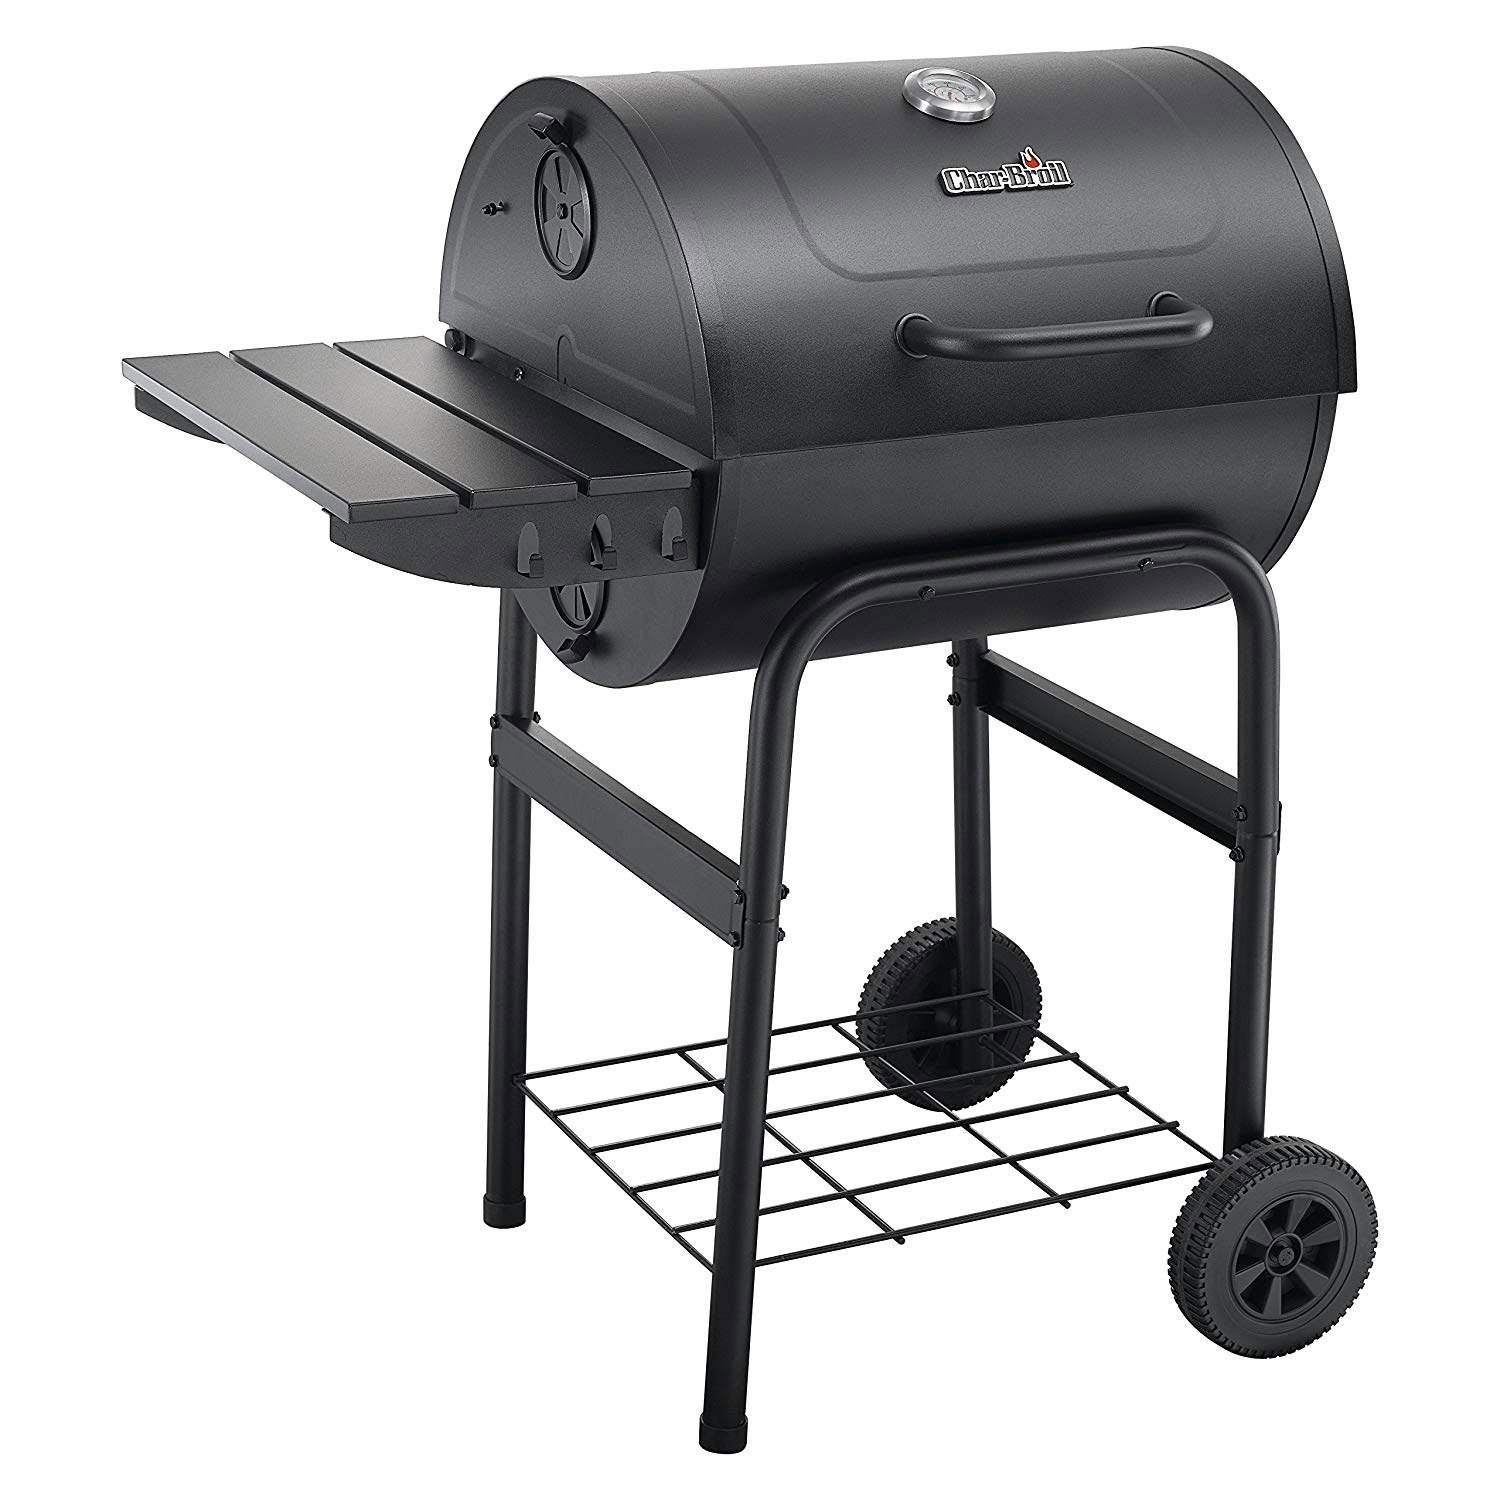 Char-Broil American Gourmet 17302055 625 Square Inch Cast Iron Charcoal Grill - image 3 of 5